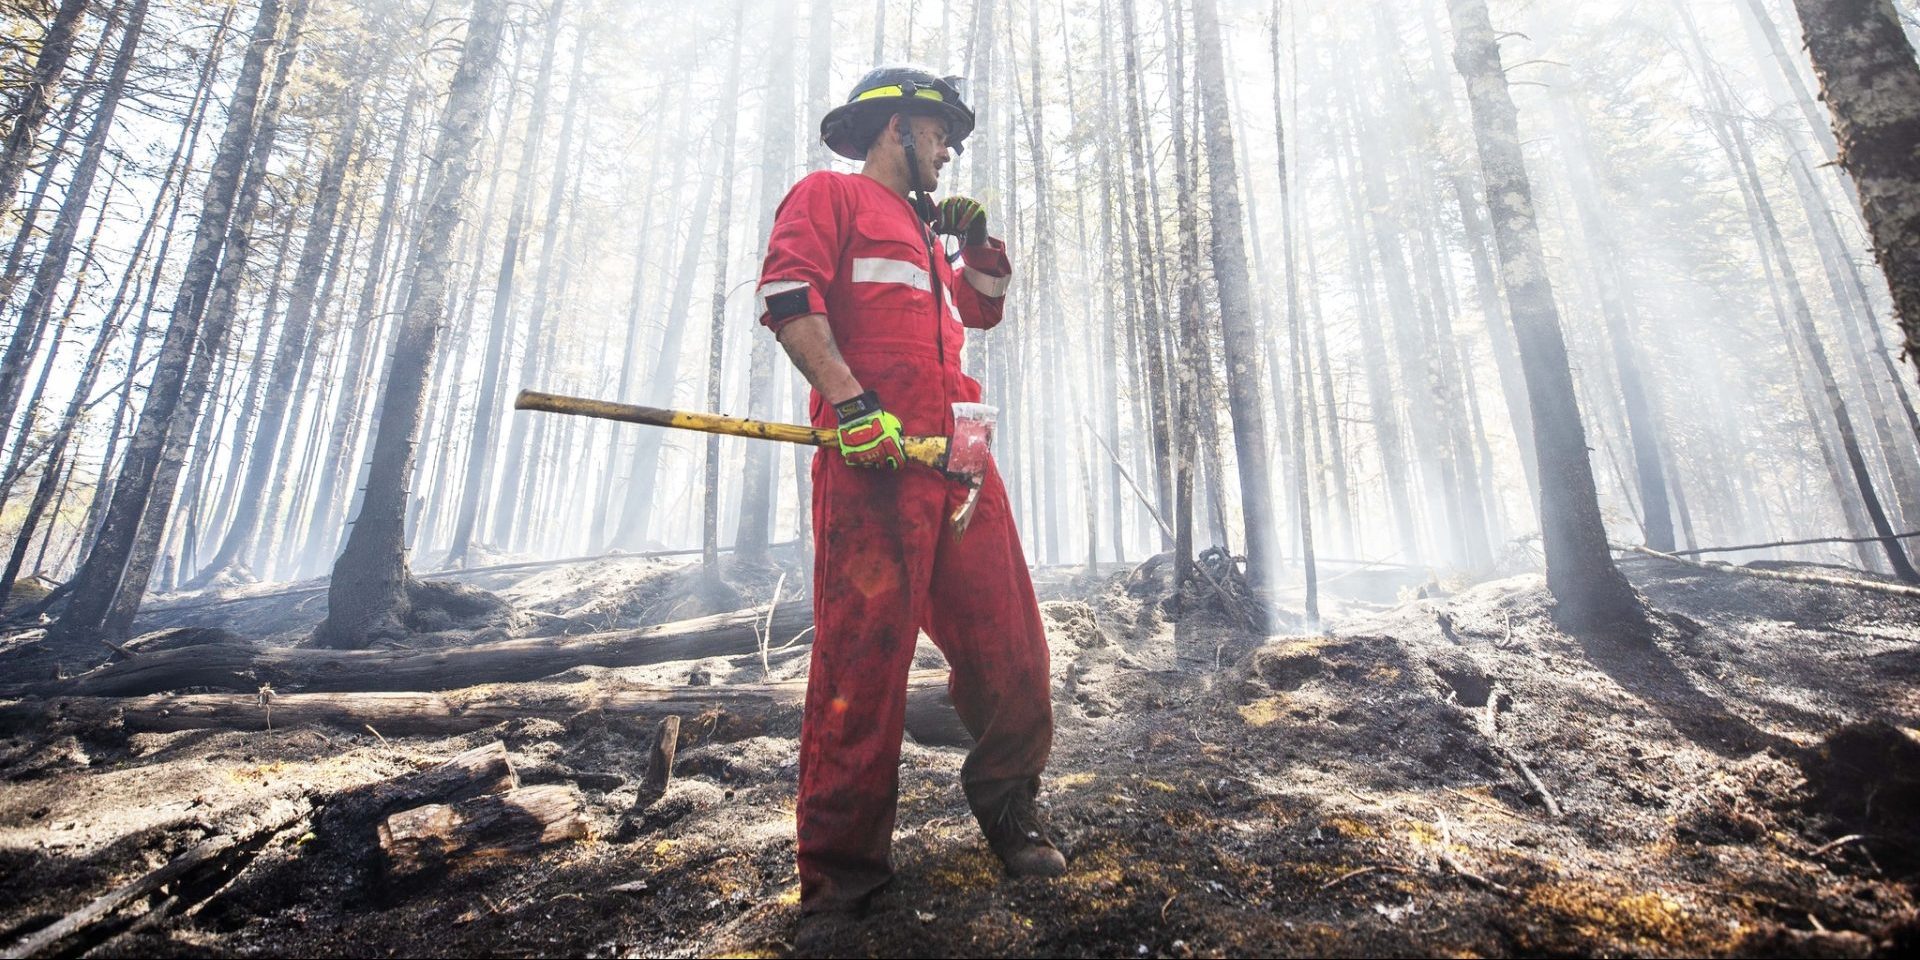 Halifax Regional Fire and Emergency firefighter Zach Rafuse at the Tantallon fire in Nova Scotia. Photograph courtesy of Communications Nova Scotia/Facebook